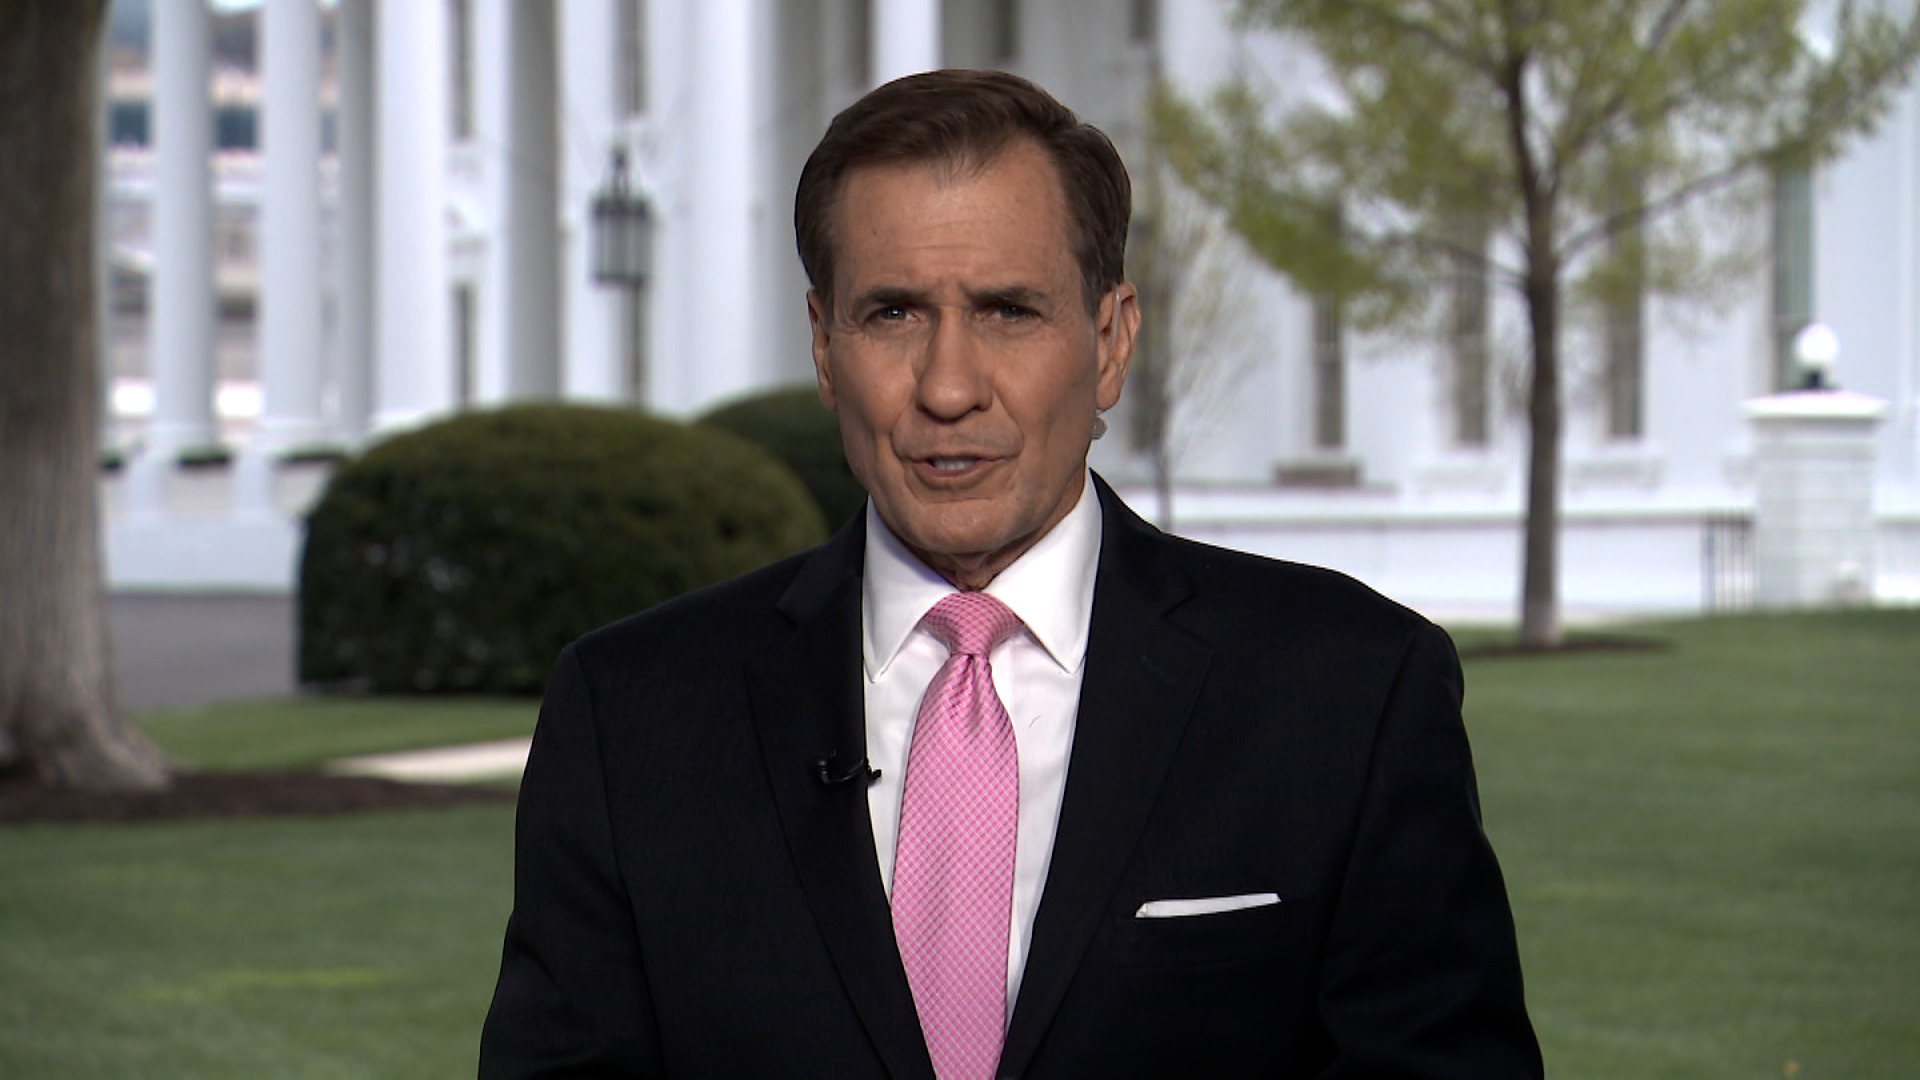  John Kirby, a spokesperson for the US National Security Council, speaks during an interview on March 31.